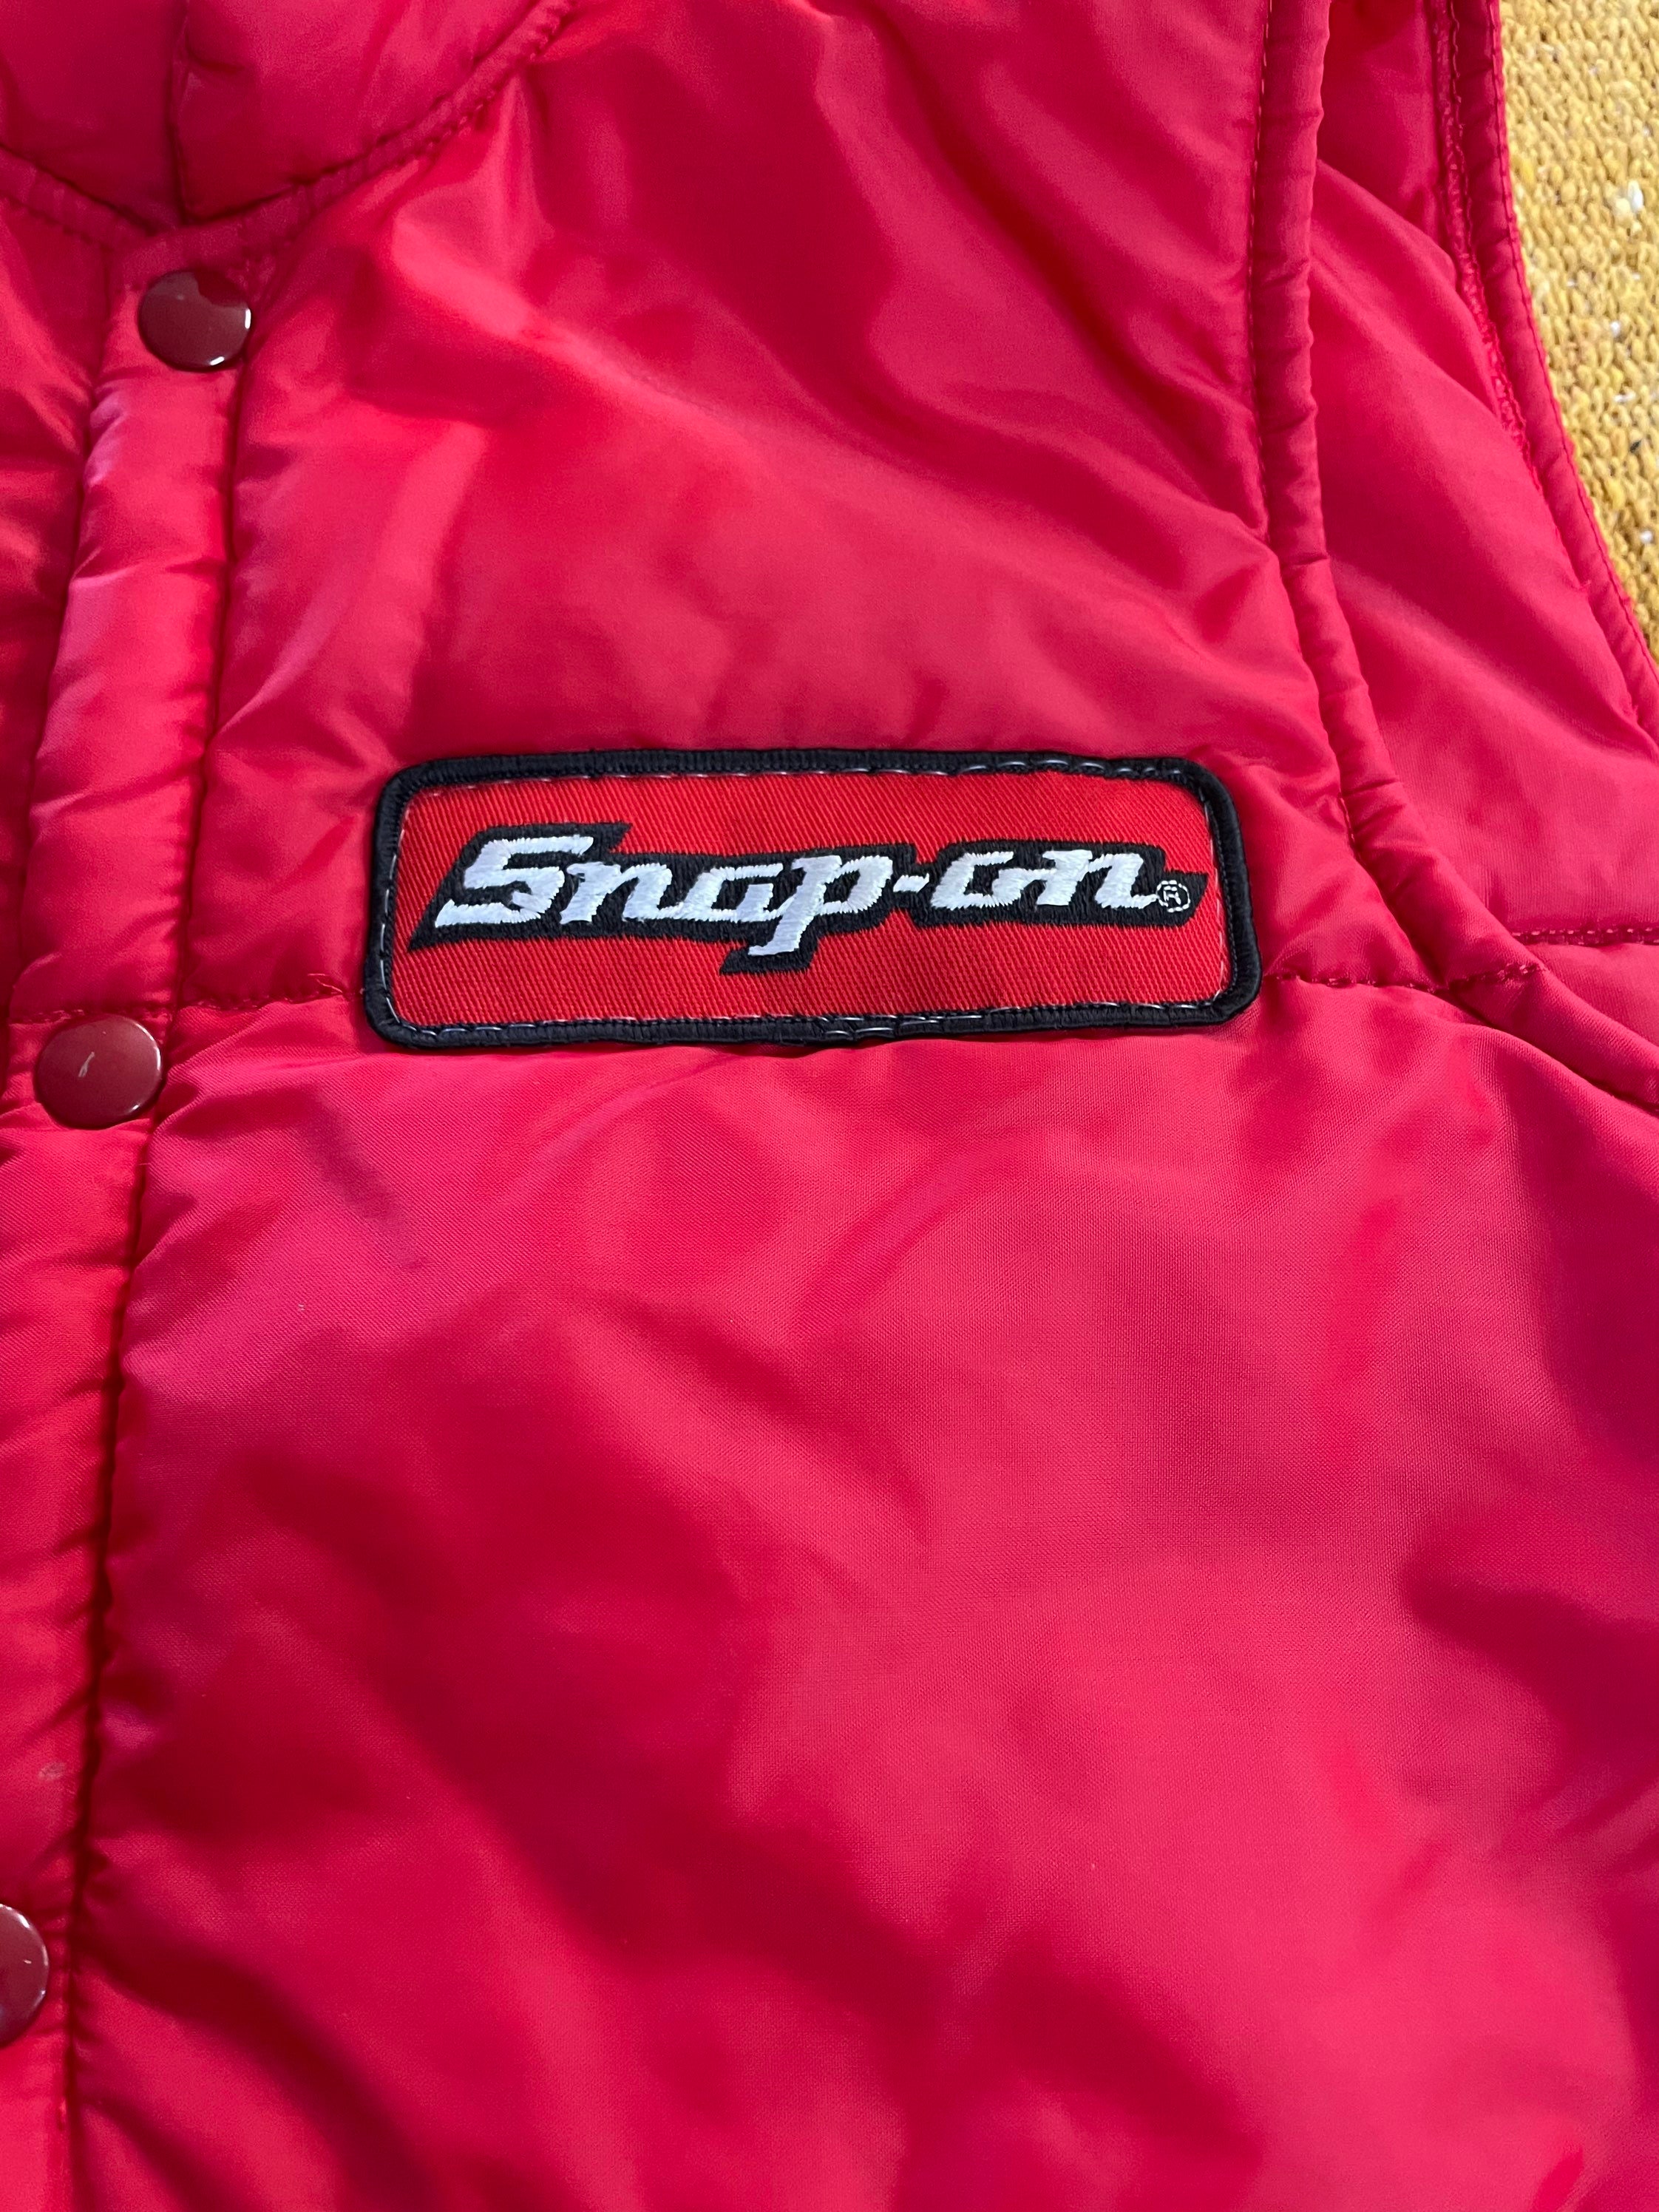 1980s Vintage Puffer Ski Vest Snap on Tools Size S Made in USA - Etsy